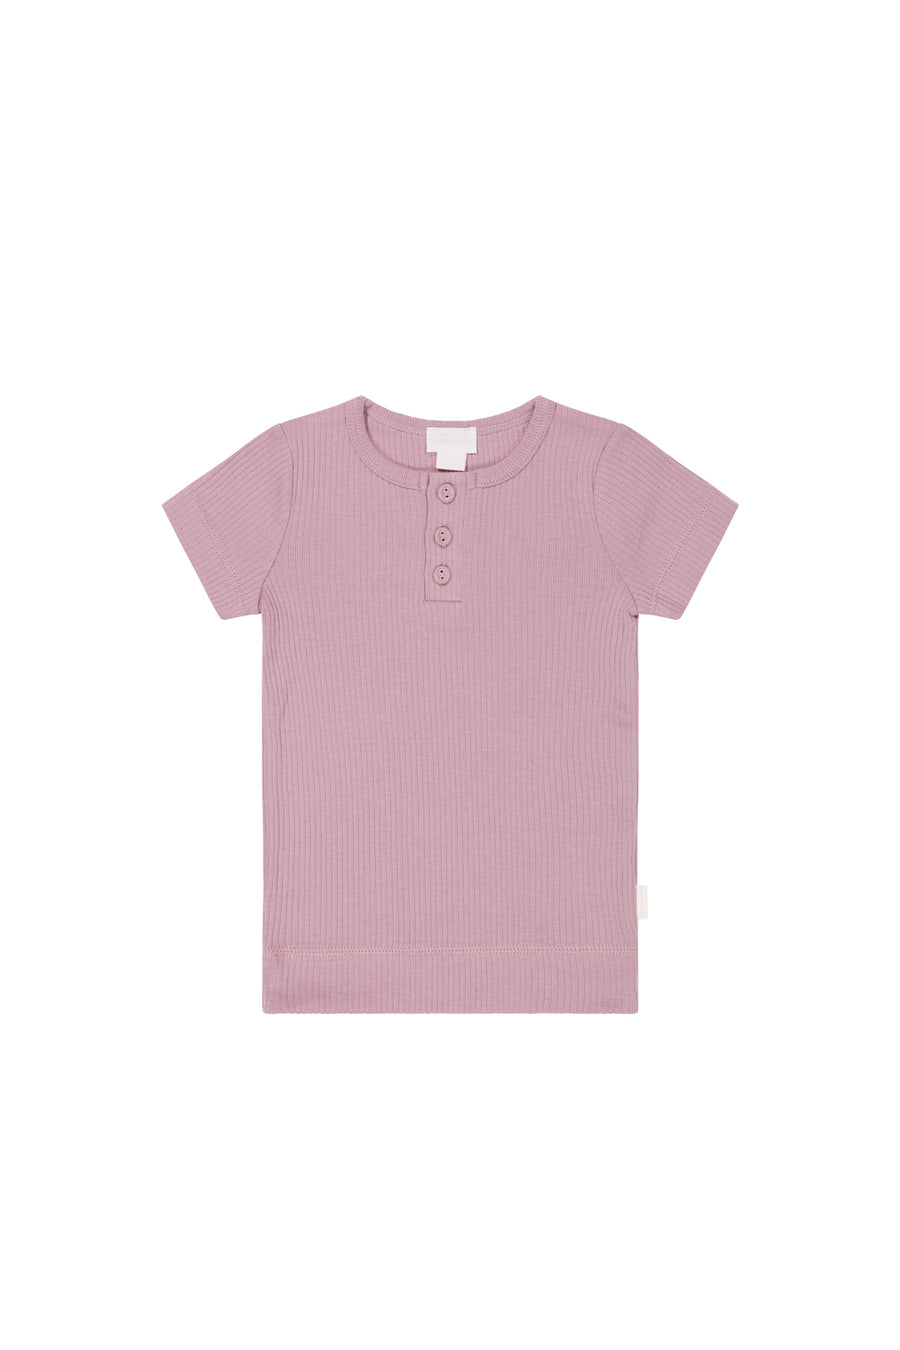 Organic Cotton Modal Henley Tee - Vintage Violet Childrens Top from Jamie Kay NZ